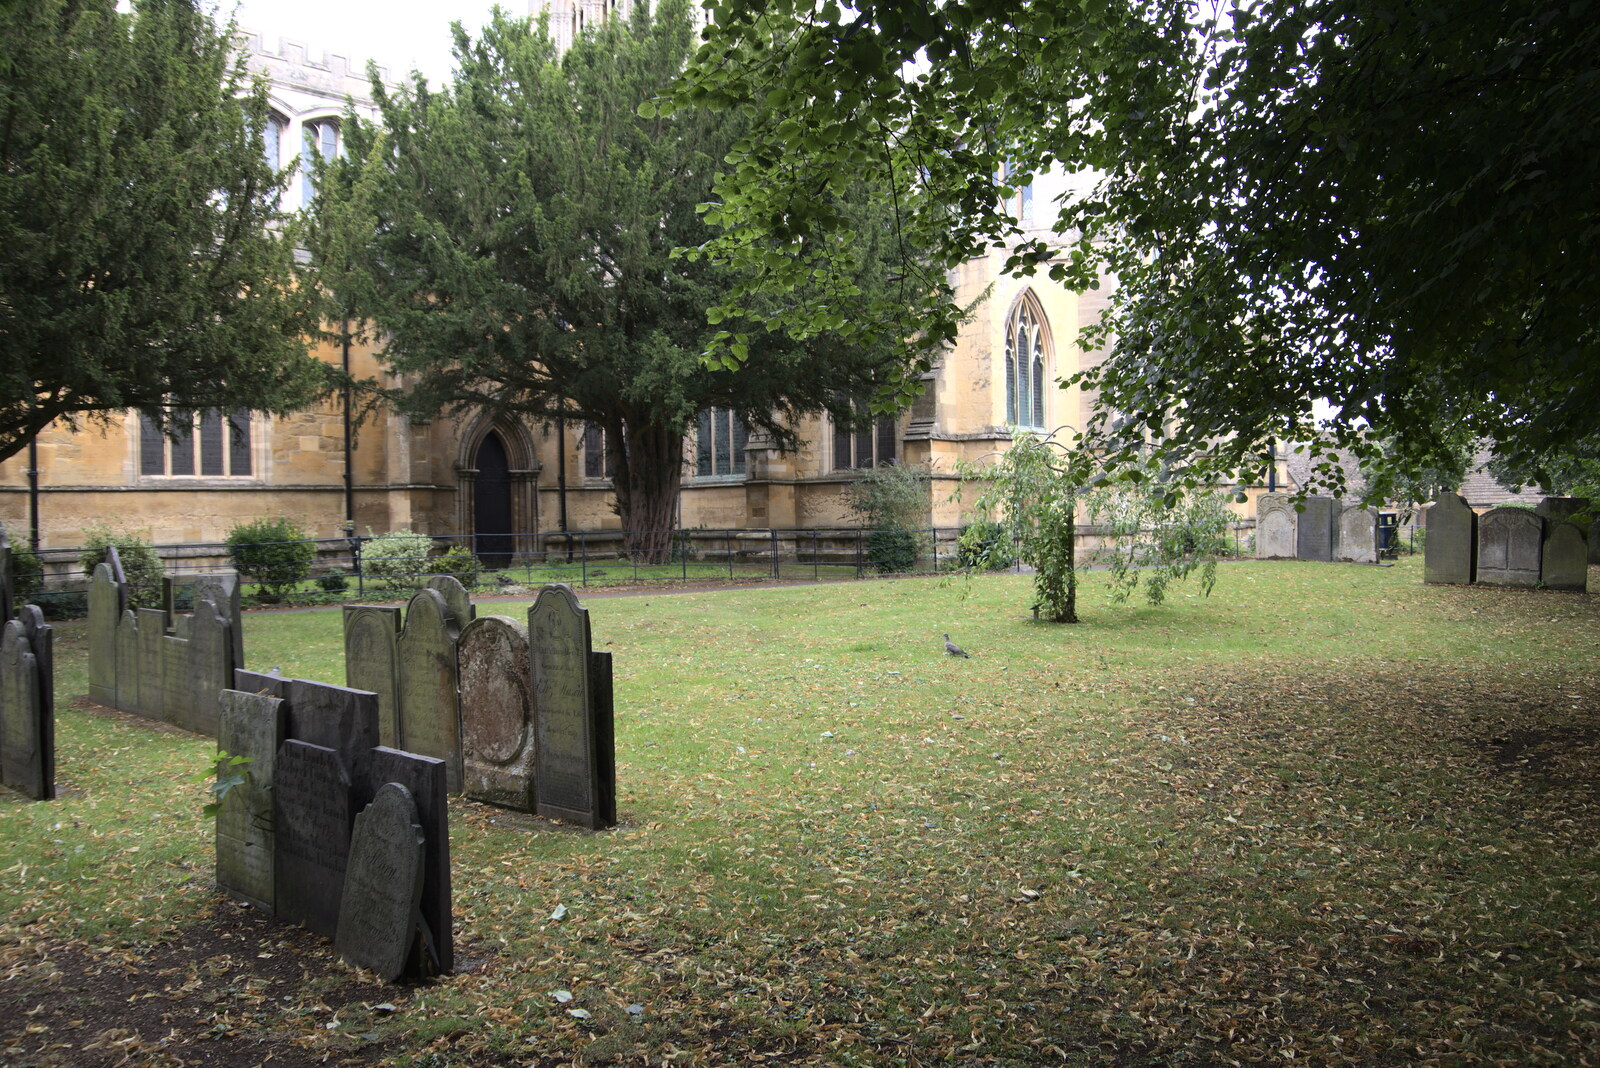 A quiet churchyard of St. Mary's in Melton Mowbray from Pork Pies and Dockside Dereliction, Melton Mowbray and Liverpool - 7th August 2021